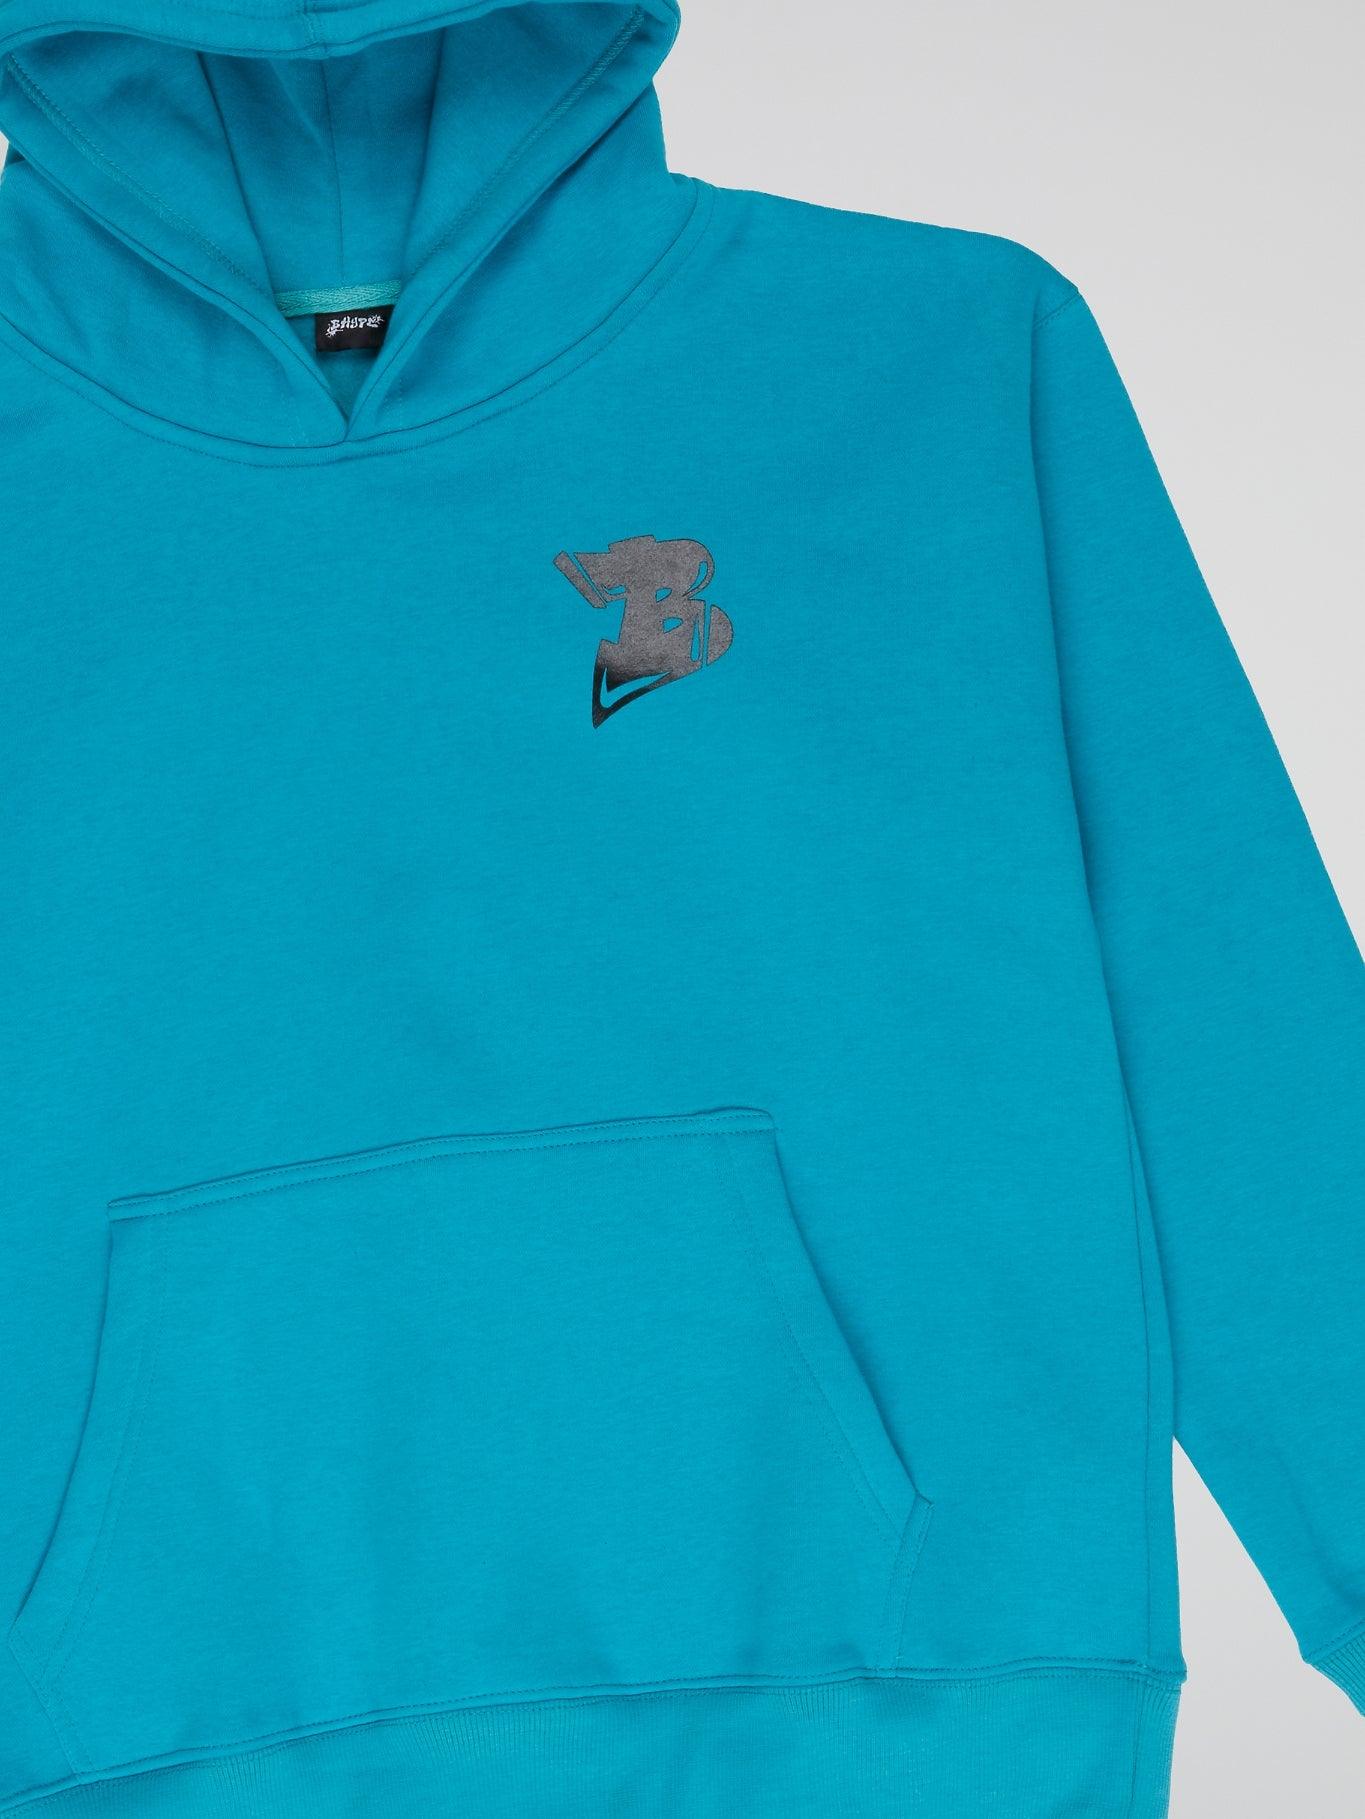 BHYPE LOGO ESSENTIALS TURQUOISE BLUE HOODIE - B-Hype Society